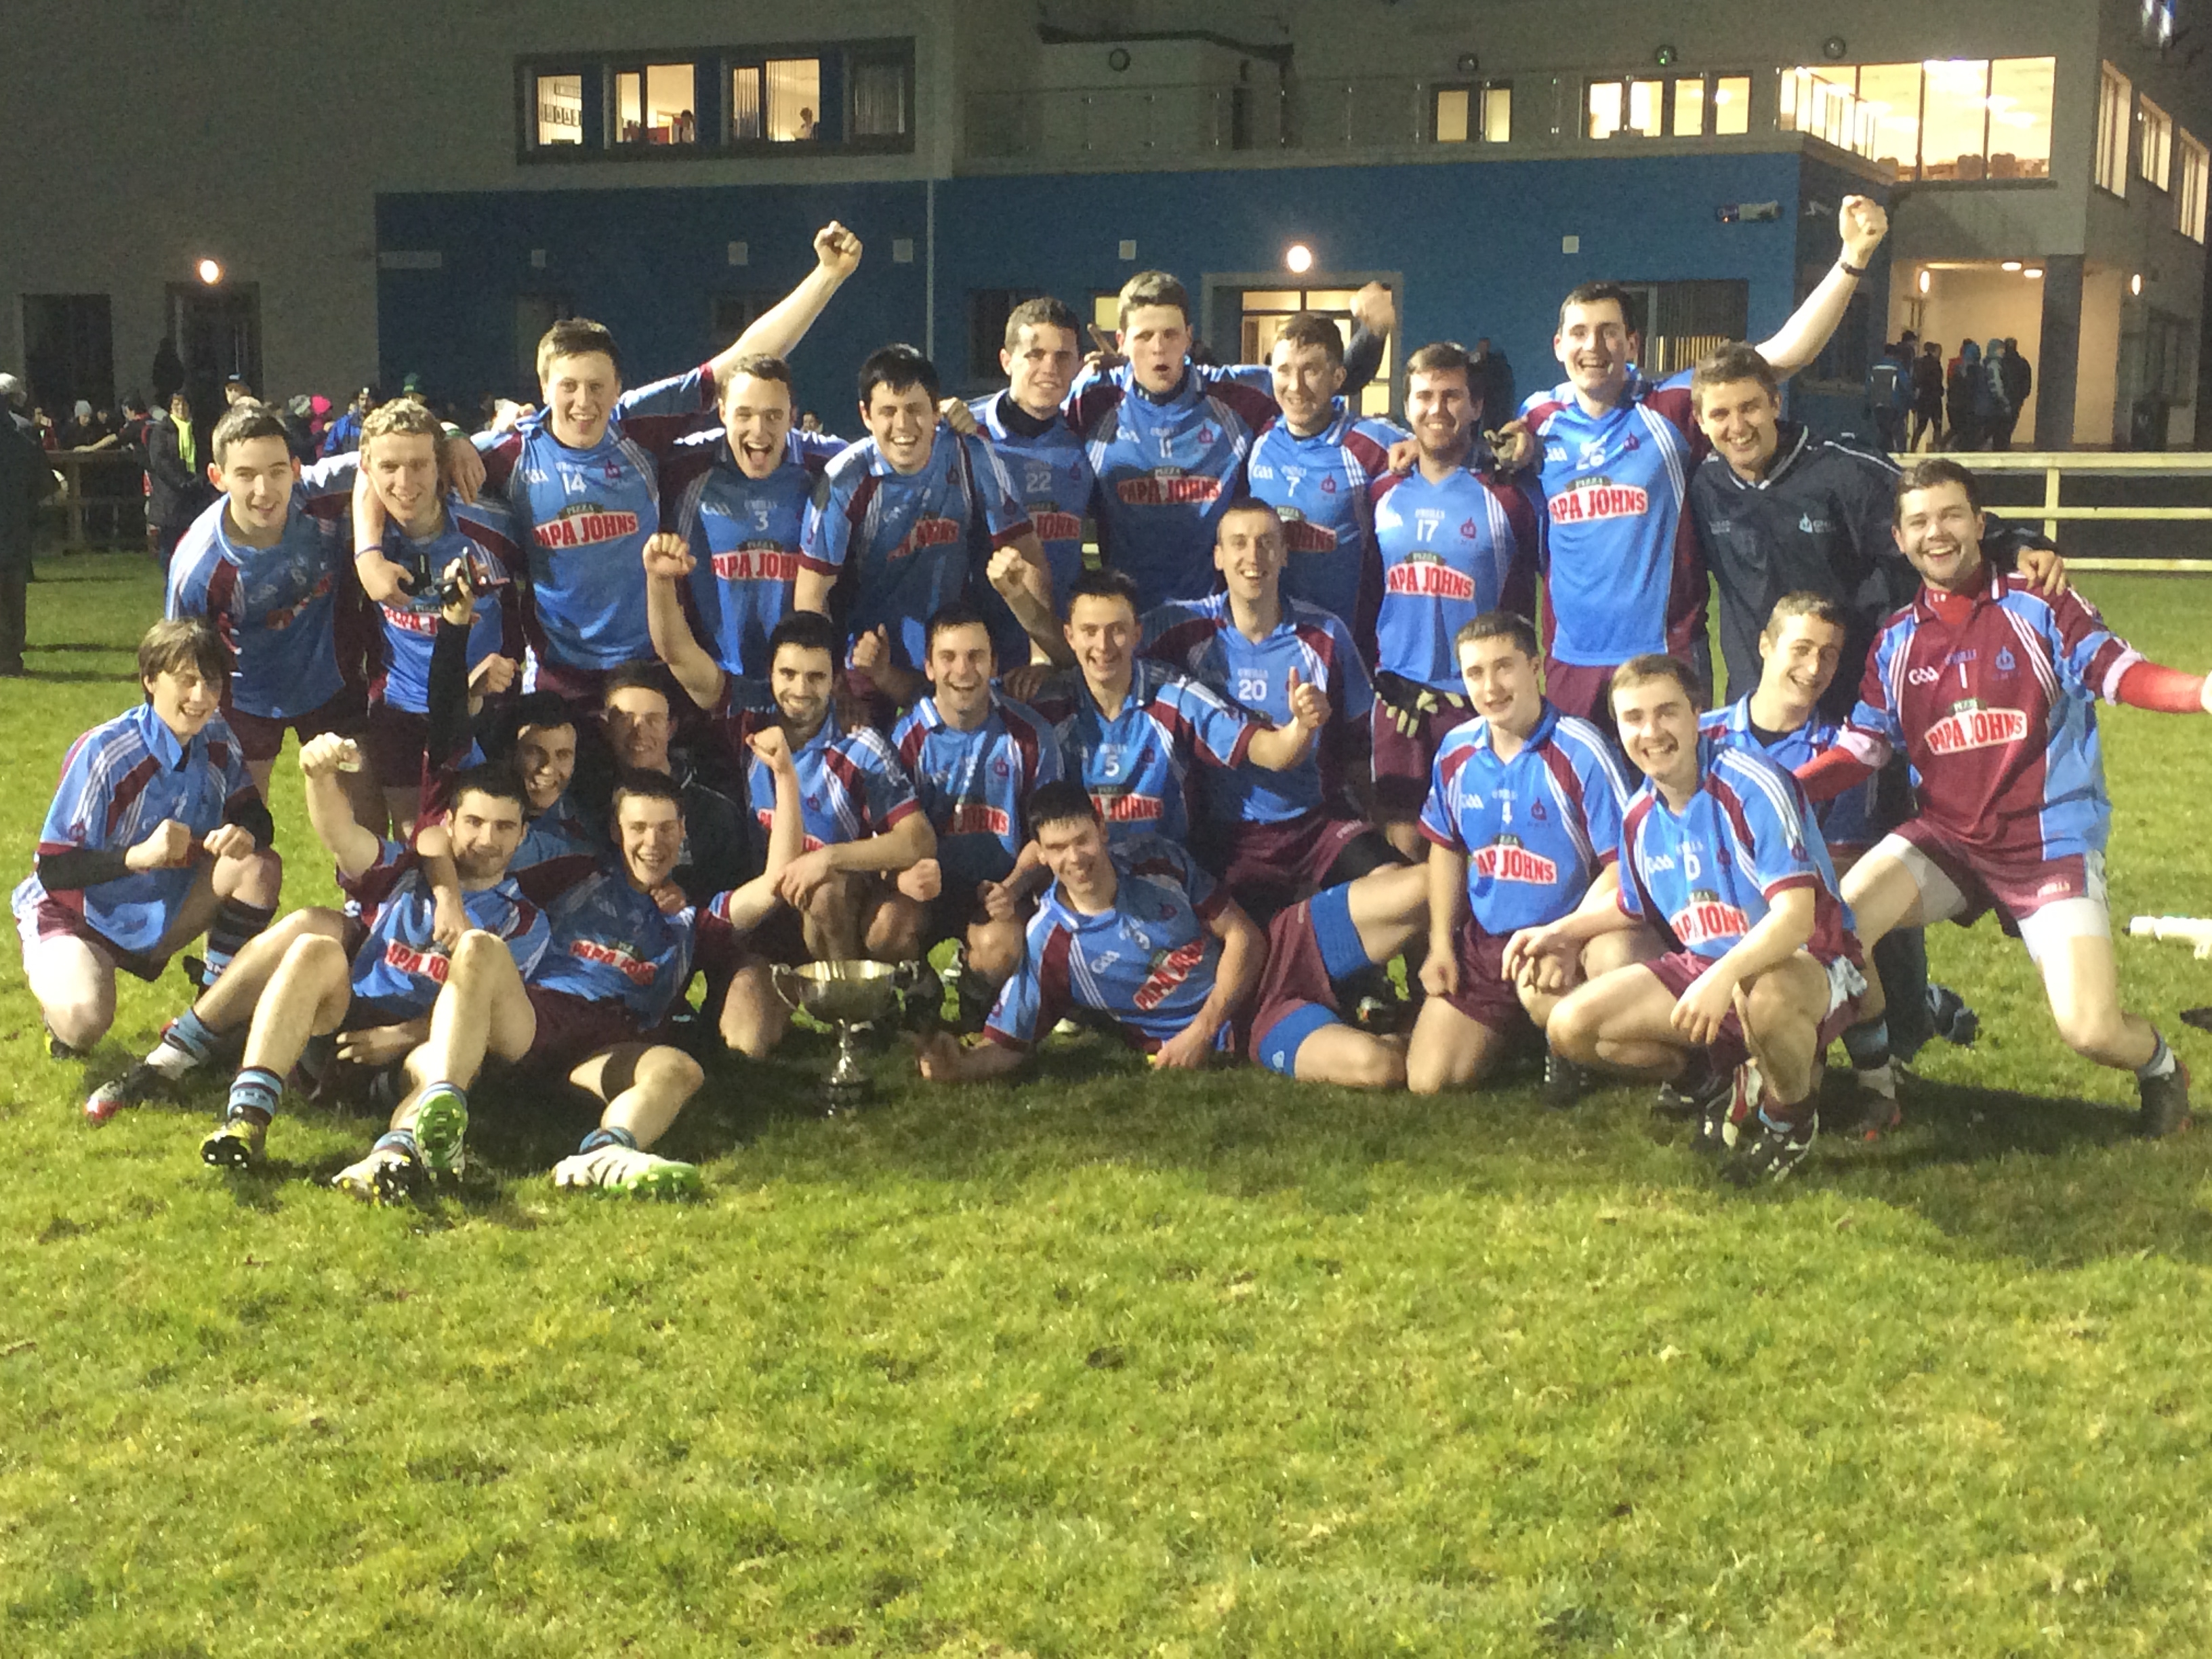 GMIT Win All Ireland Colleges Title